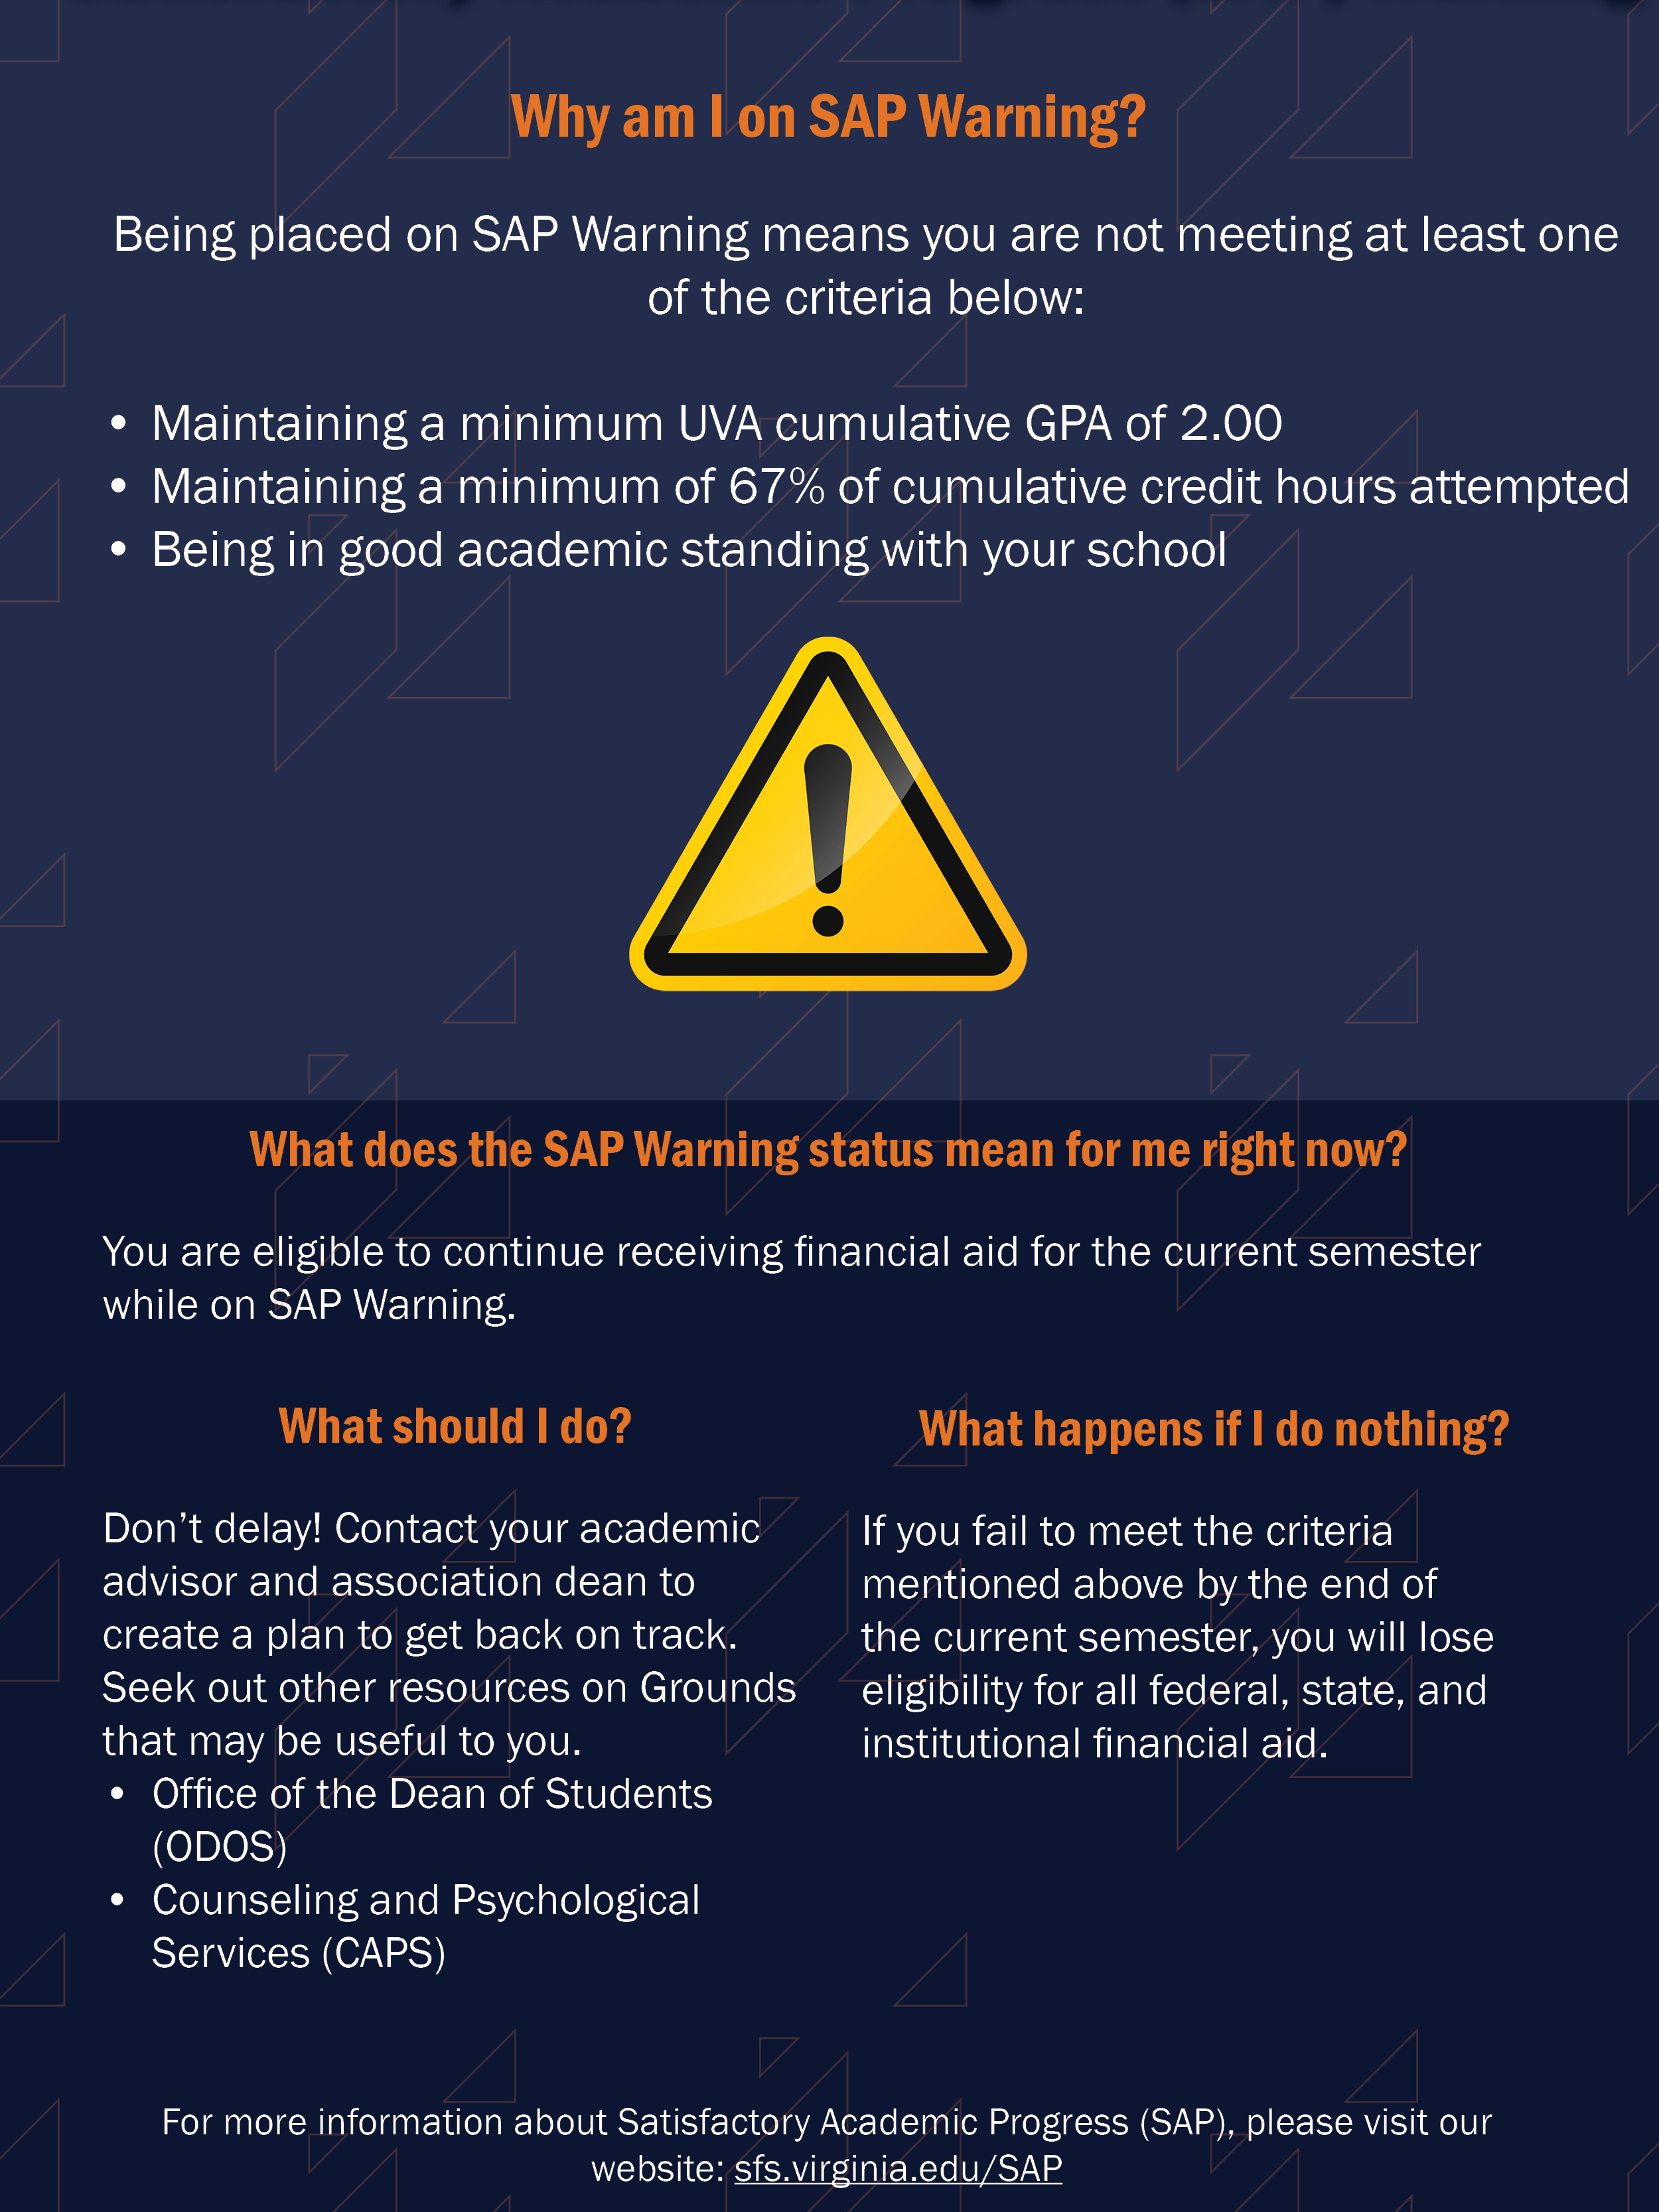 An infographic is displayed that explains why a student may have been put on SAP Warning including: 1) Not maintaining a minimum UVA cumulative GPA of 2.00. 2) Not maintaining a minimum of 67% of cumulative credit hours attempted. 3) Not being in good academic standing with your school.